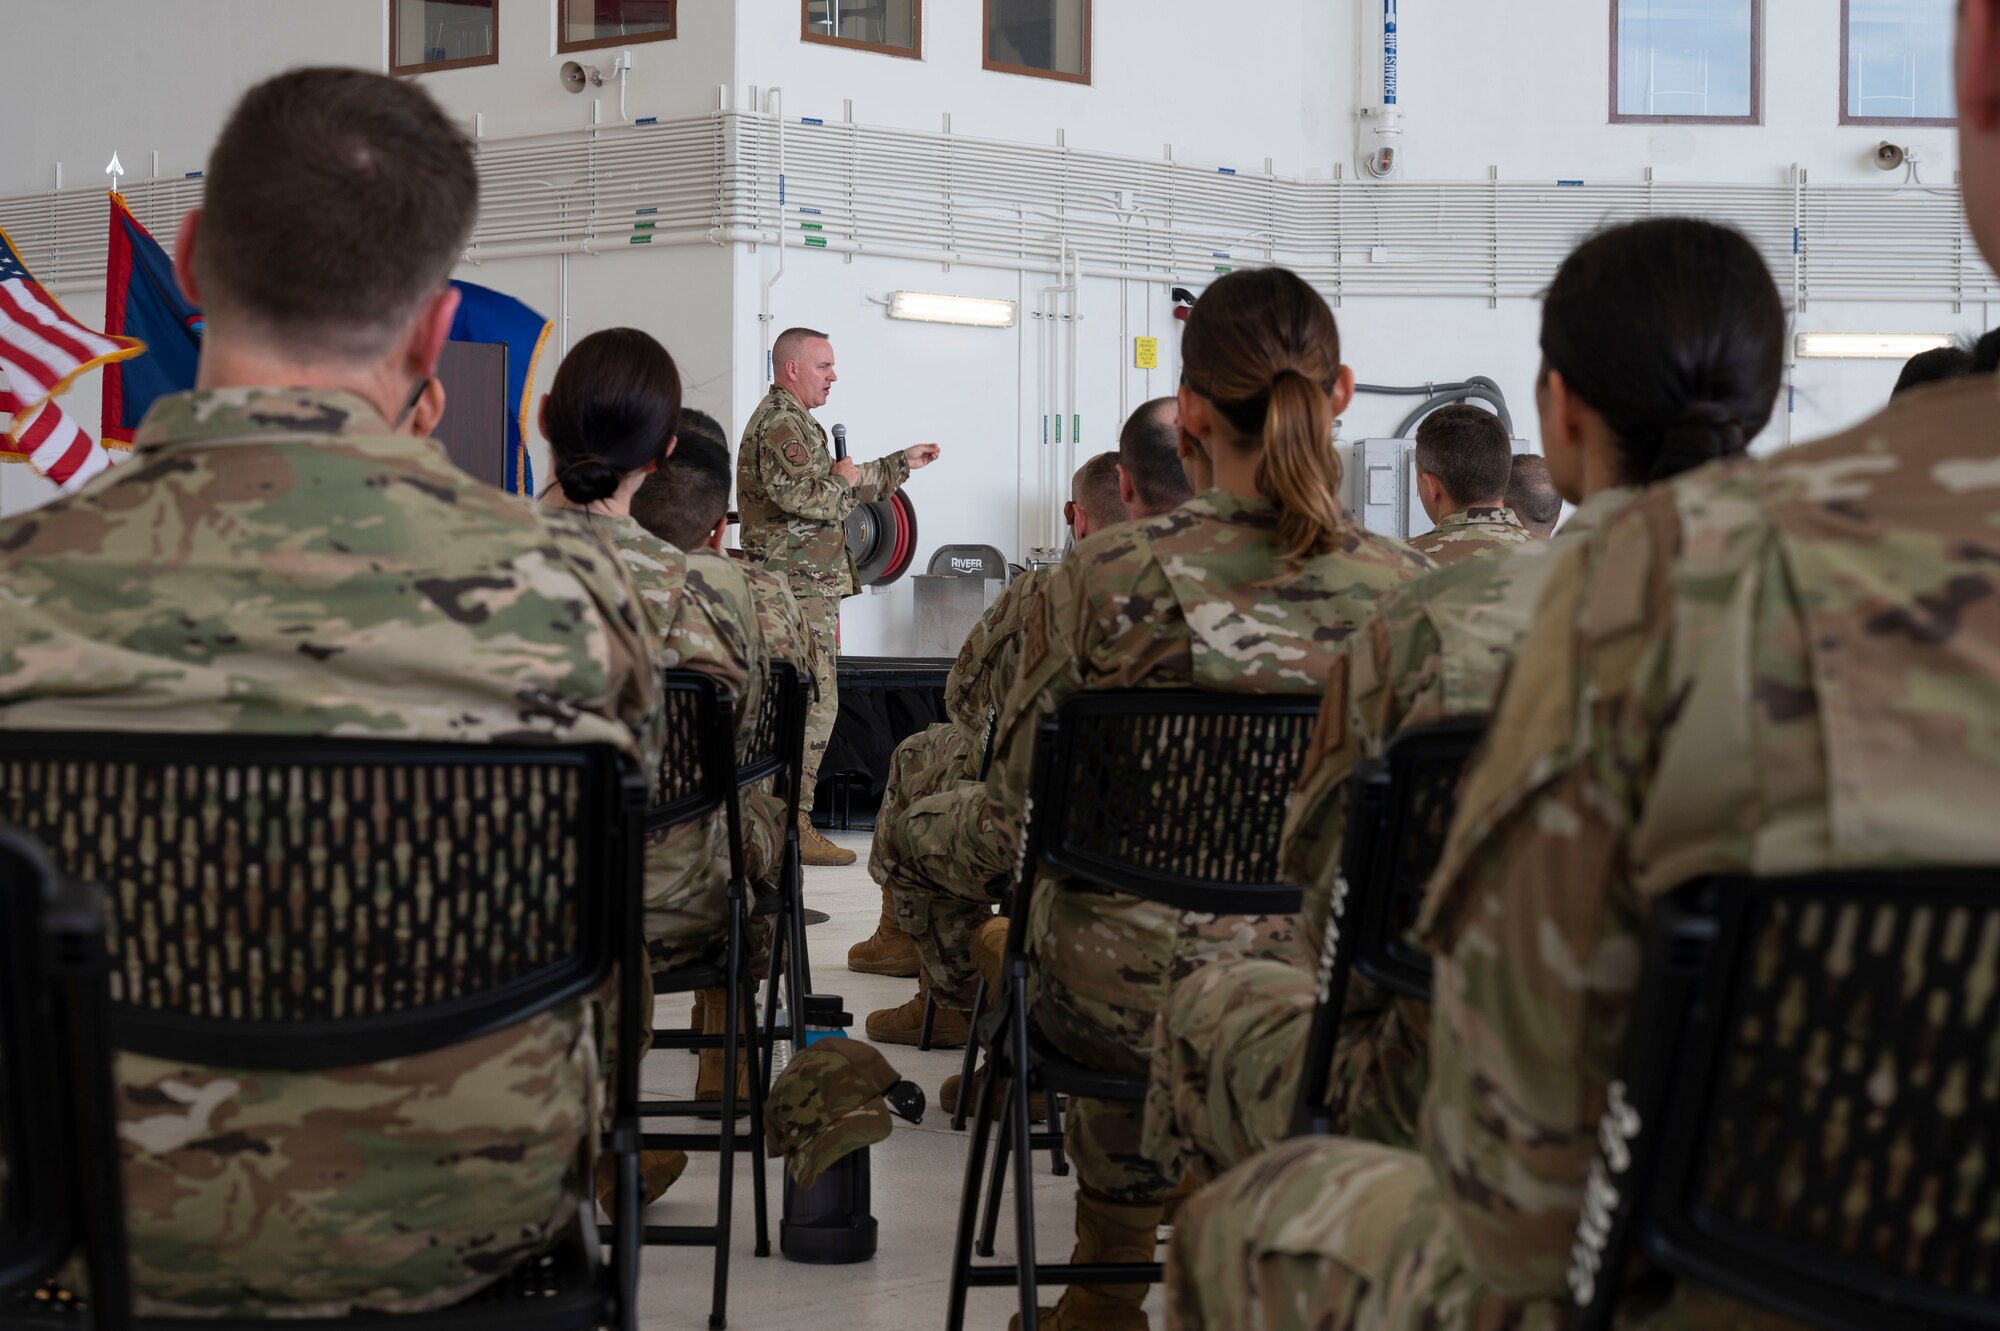 U.S. Air Force Chief Master Sgt. David R. Wolfe, Pacific Air Forces command chief, speaks to Airmen during an all-call at Andersen Air Force Base, Guam, April 14, 2022.